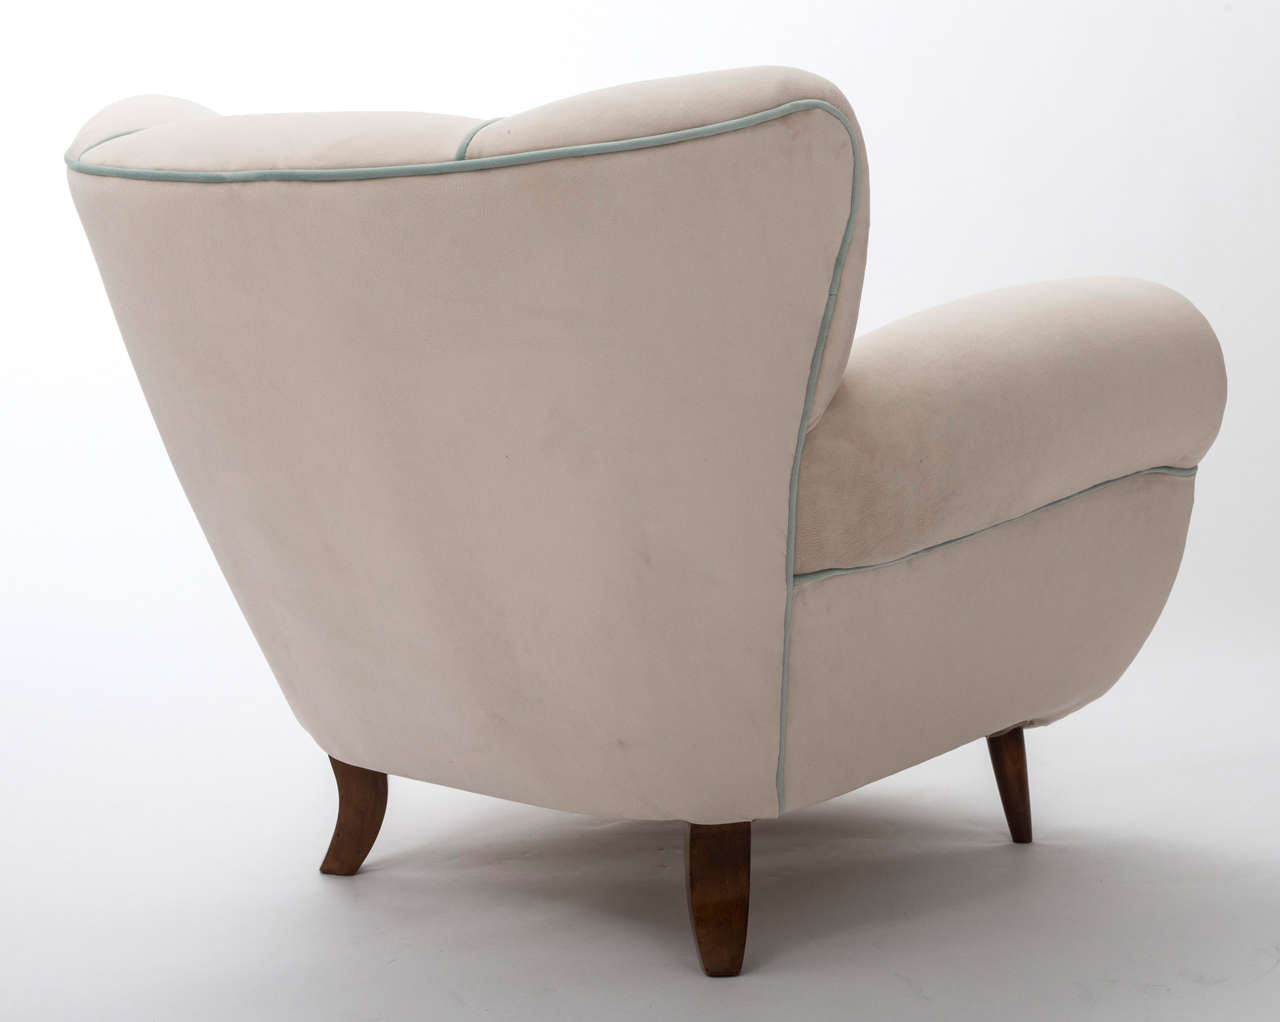 Velvet Guglielmo Ulrich attributed pair of armchairs, Italy circa 1940